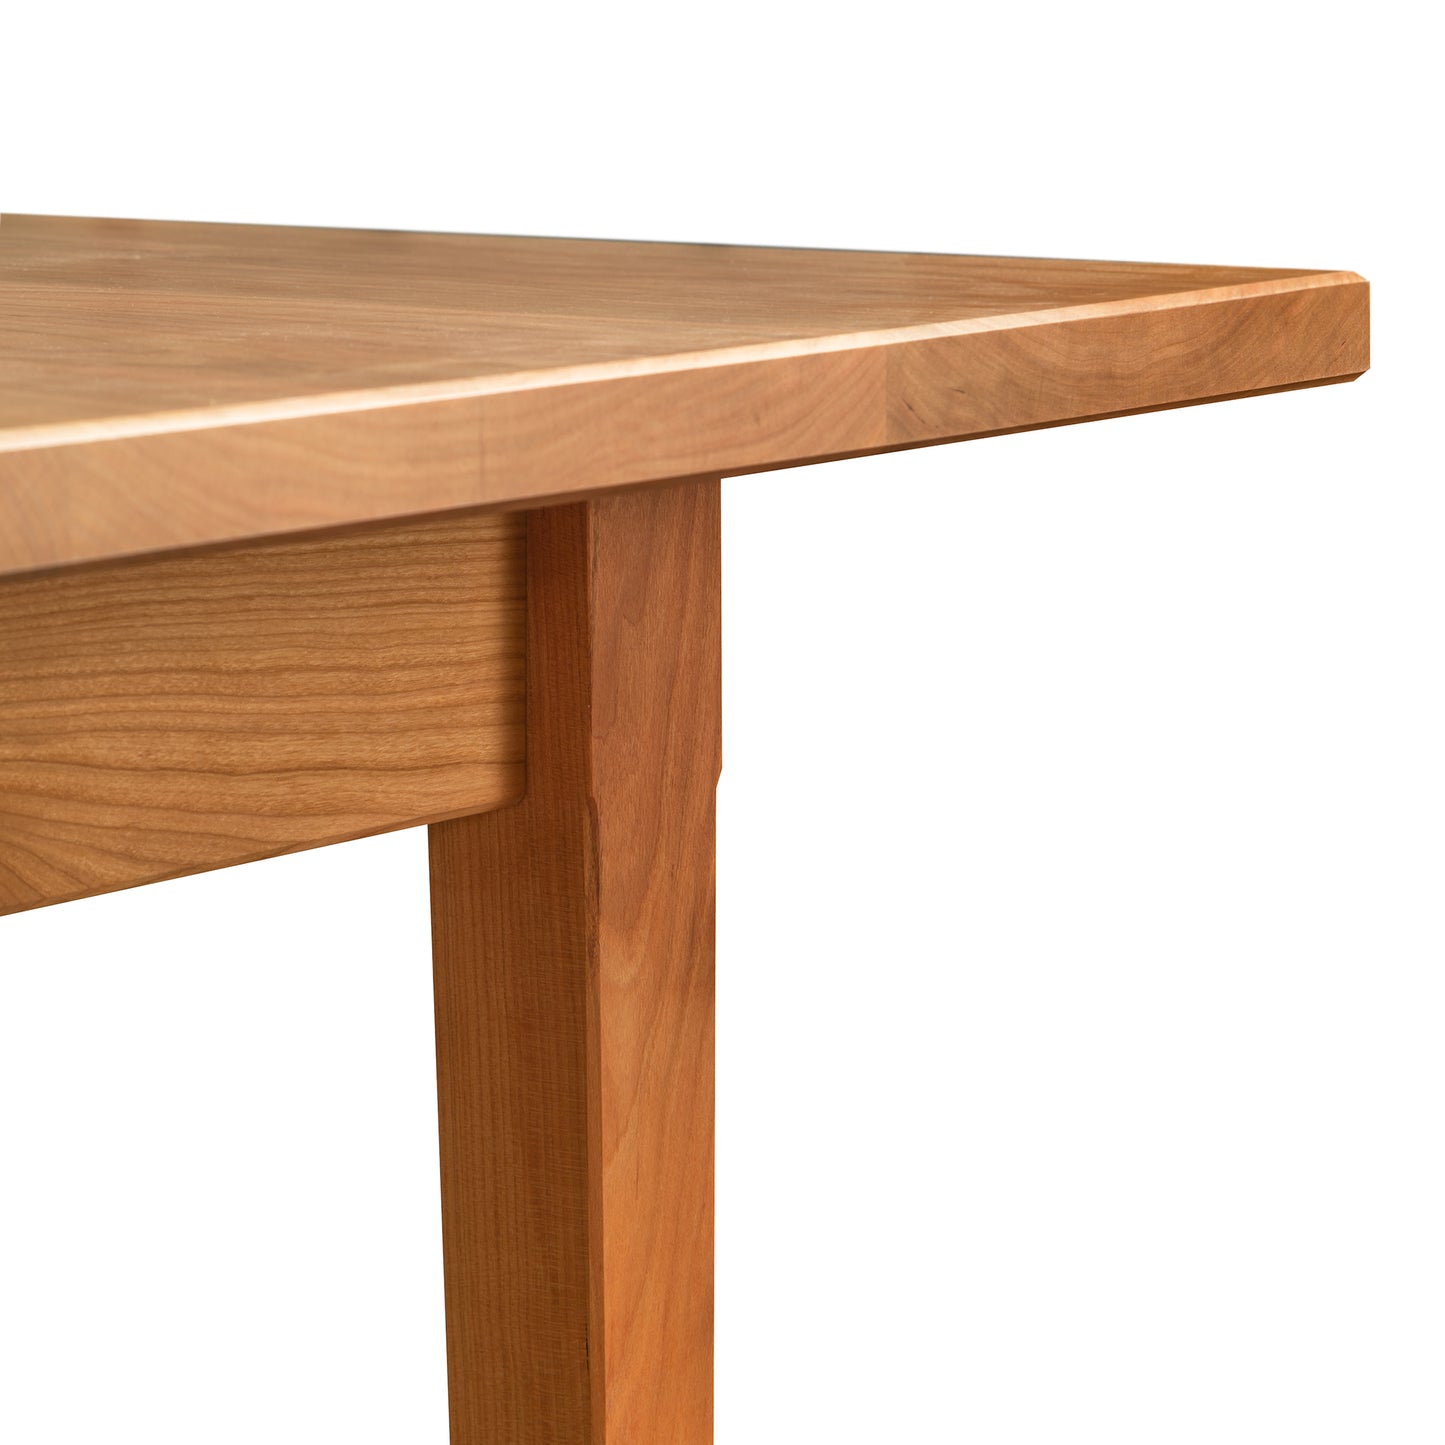 Close-up of a Vermont Shaker Rectangular Extension Dining Table corner showing the tabletop and leg with visible wood grain, sustainably harvested wood, isolated on a white background by Maple Corner Woodworks.